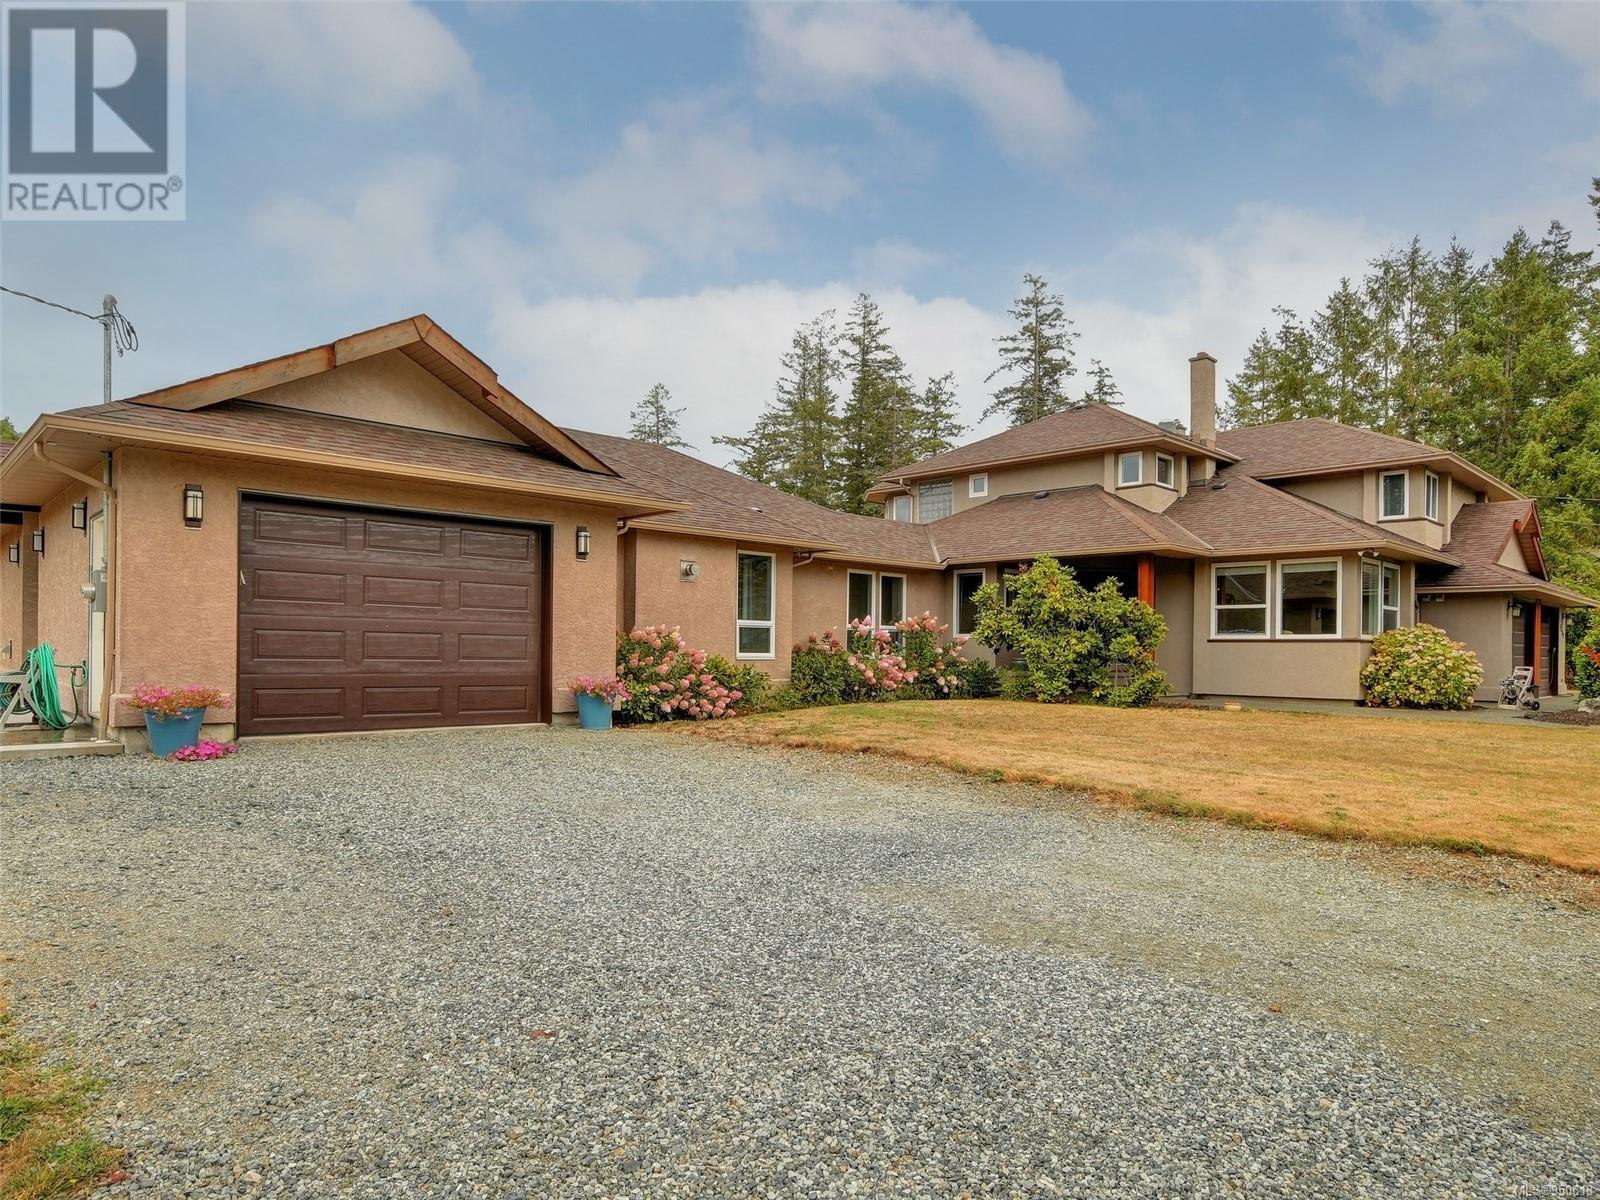 1530 Kersey Rd, Central Saanich, British Columbia  V8M 1J5 - Photo 1 - 950613